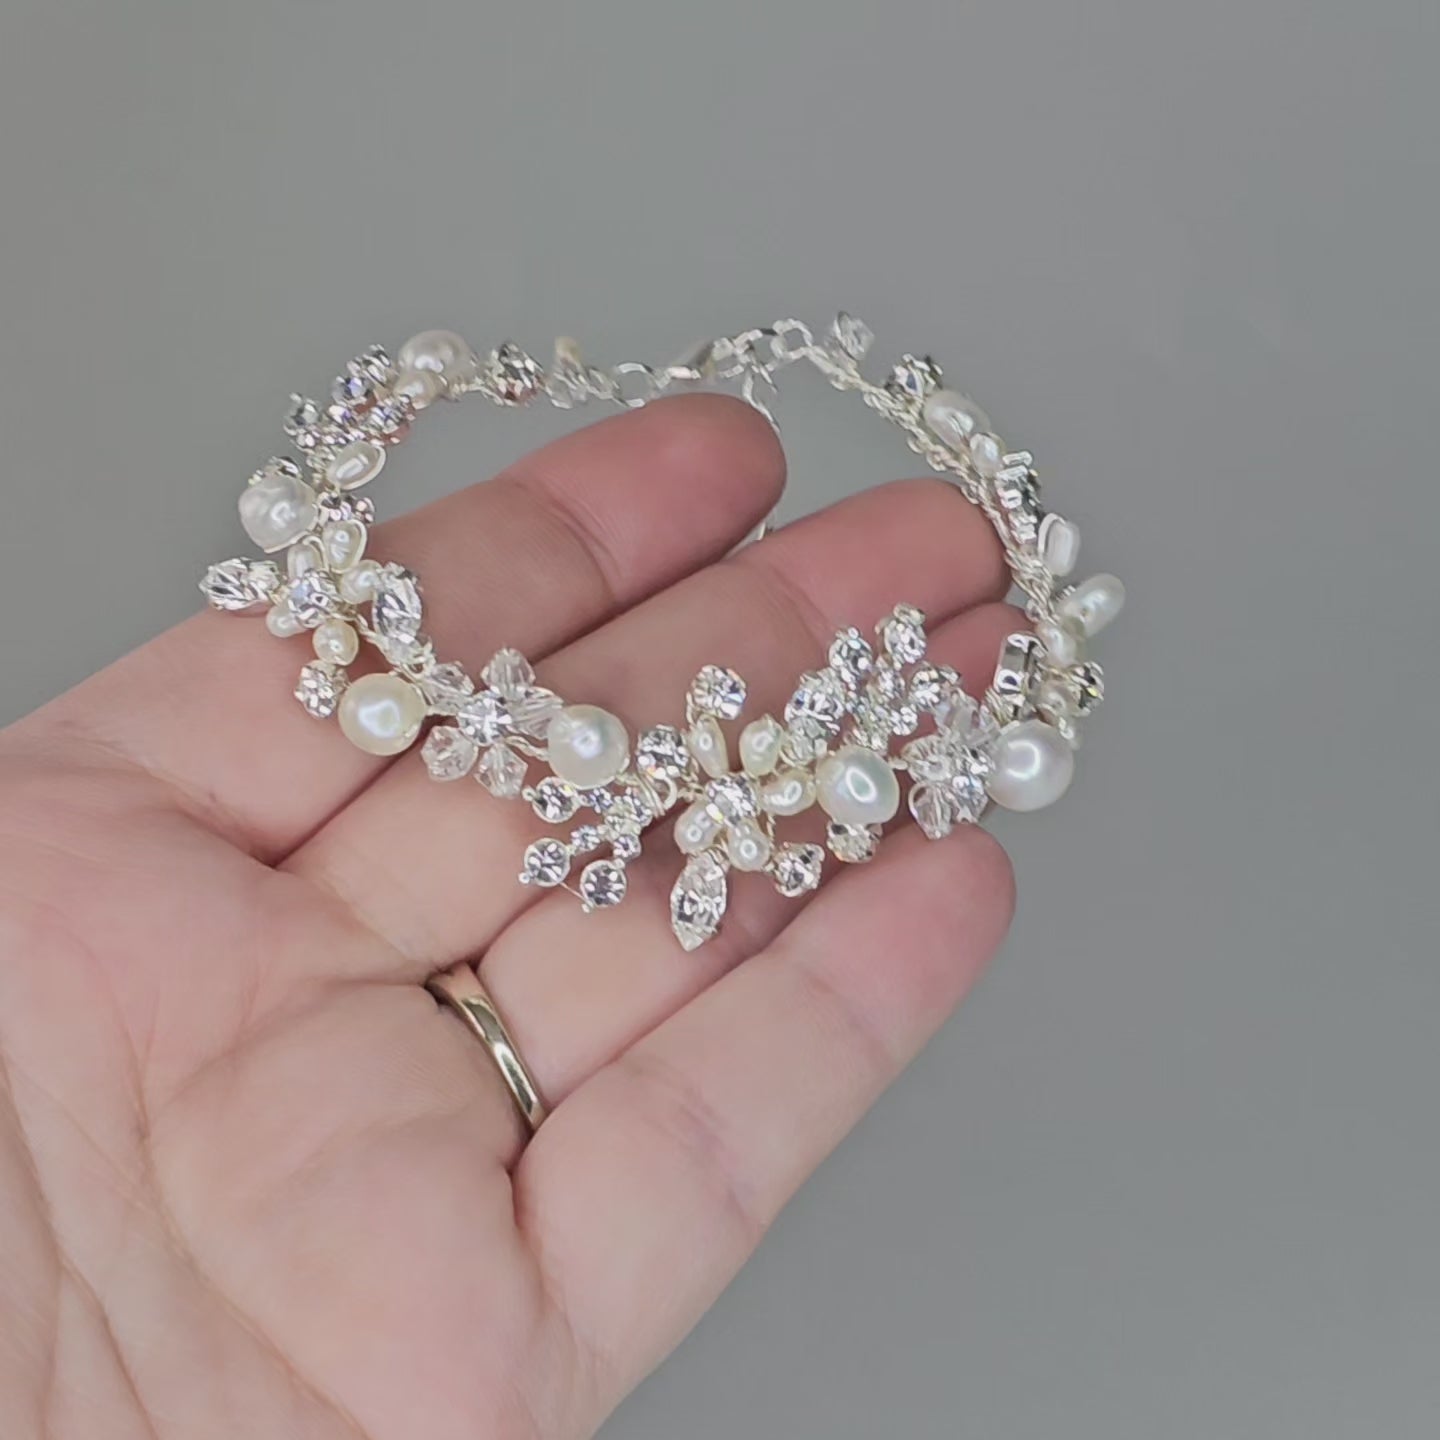 Bracelet with Freshwater Pearls and Crystals